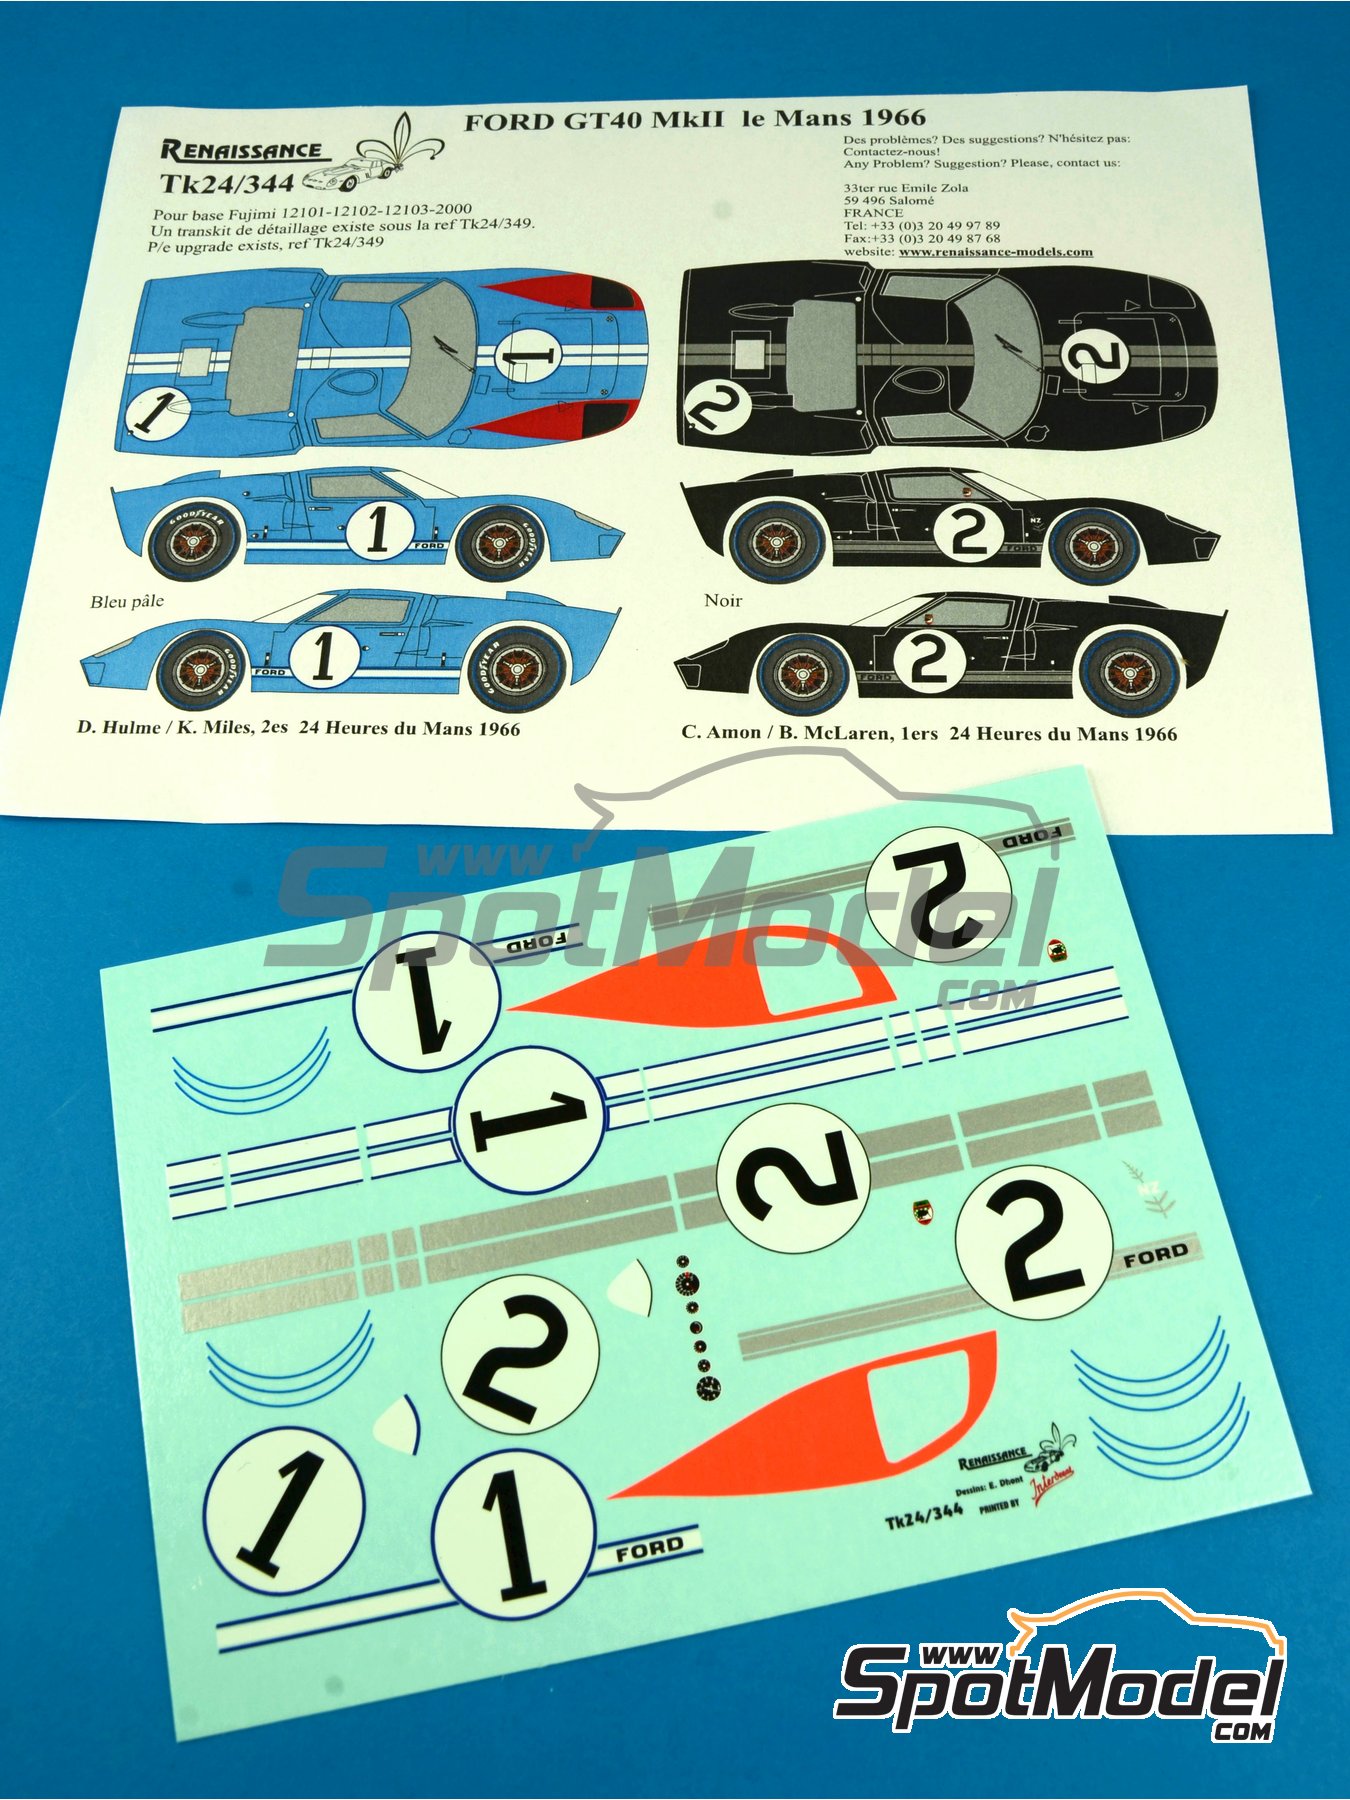 Decals ford gt40 le mans test 1971 76 1:32 1:43 1:24 1:18 decals 